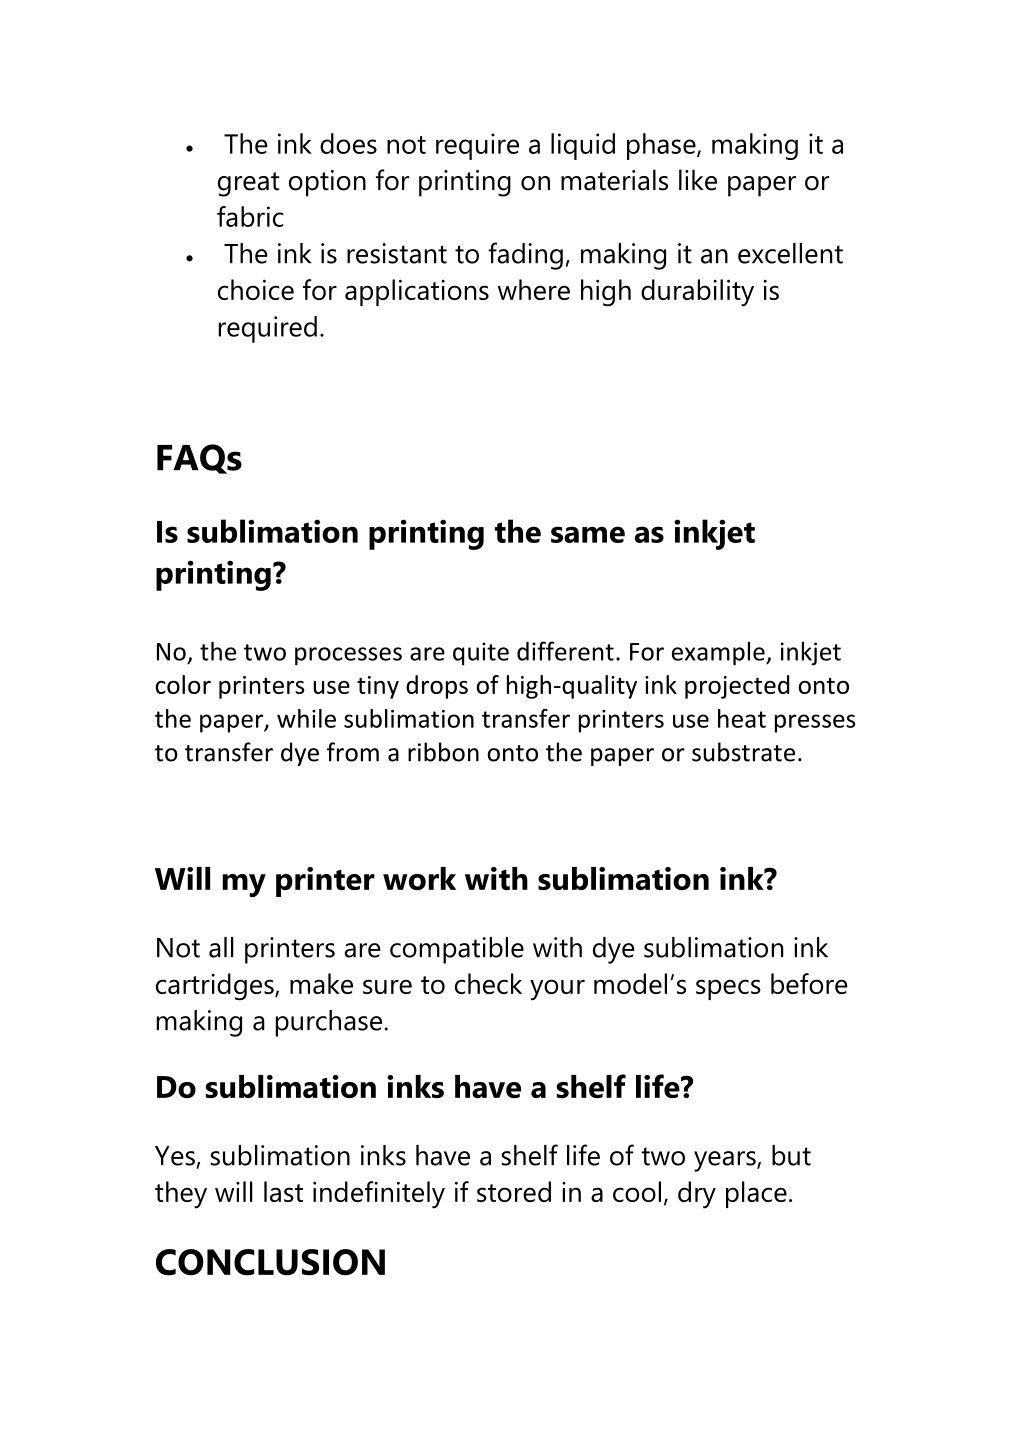 Ppt Best Sublimation Ink For Your Printer Buyers Guide Powerpoint Presentation Id11450870 6549